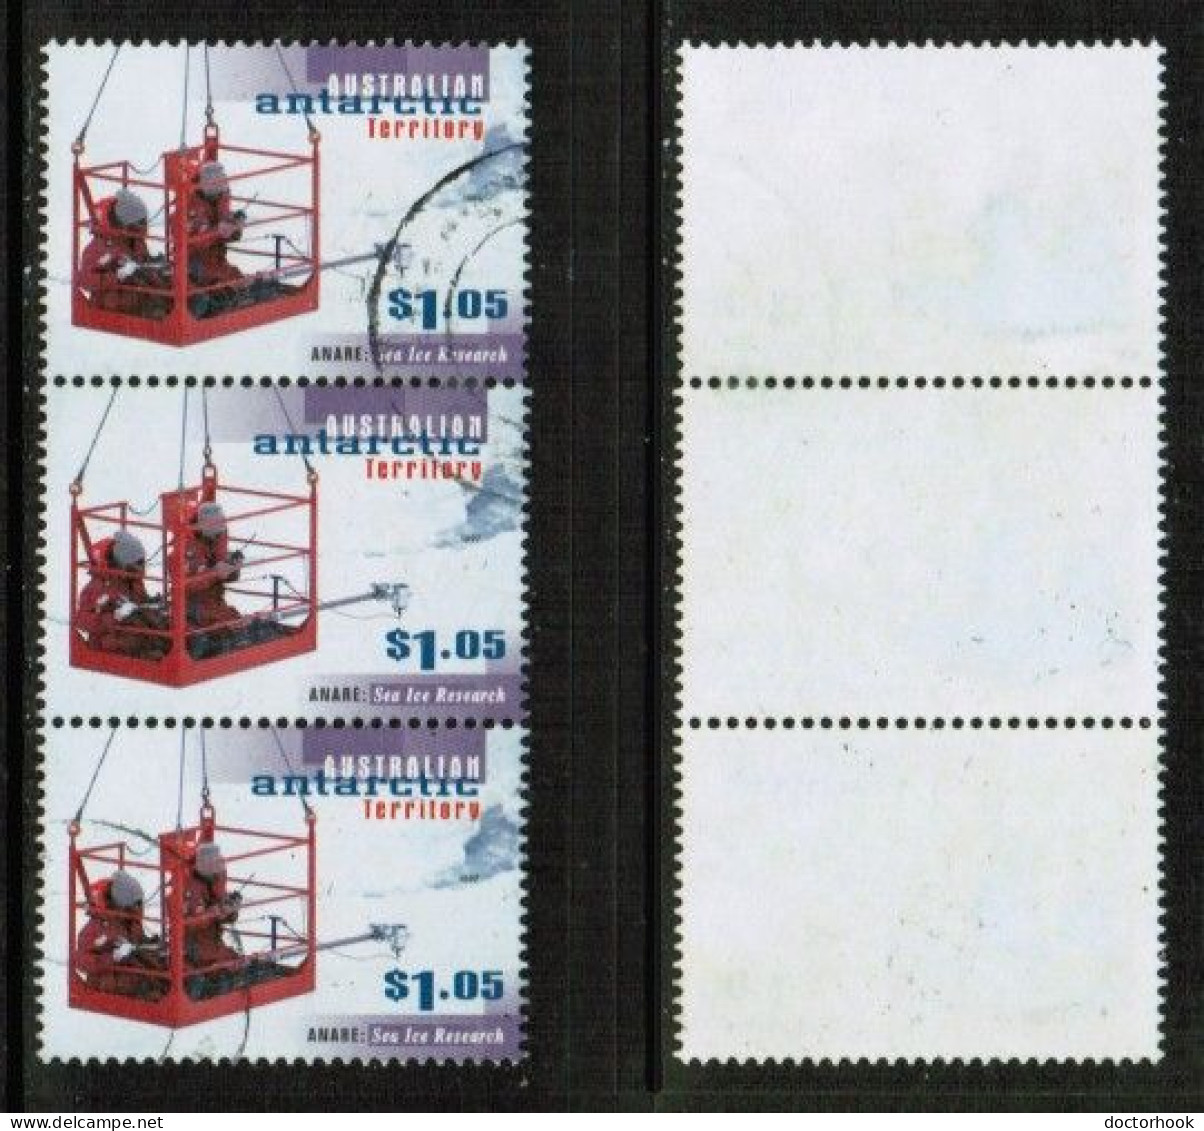 AUSTRALIAN ANTARCTIC TERRITORY   Scott # L 105 USED STRIP Of 3 (CONDITION AS PER SCAN) (Stamp Scan # 930-2) - Used Stamps